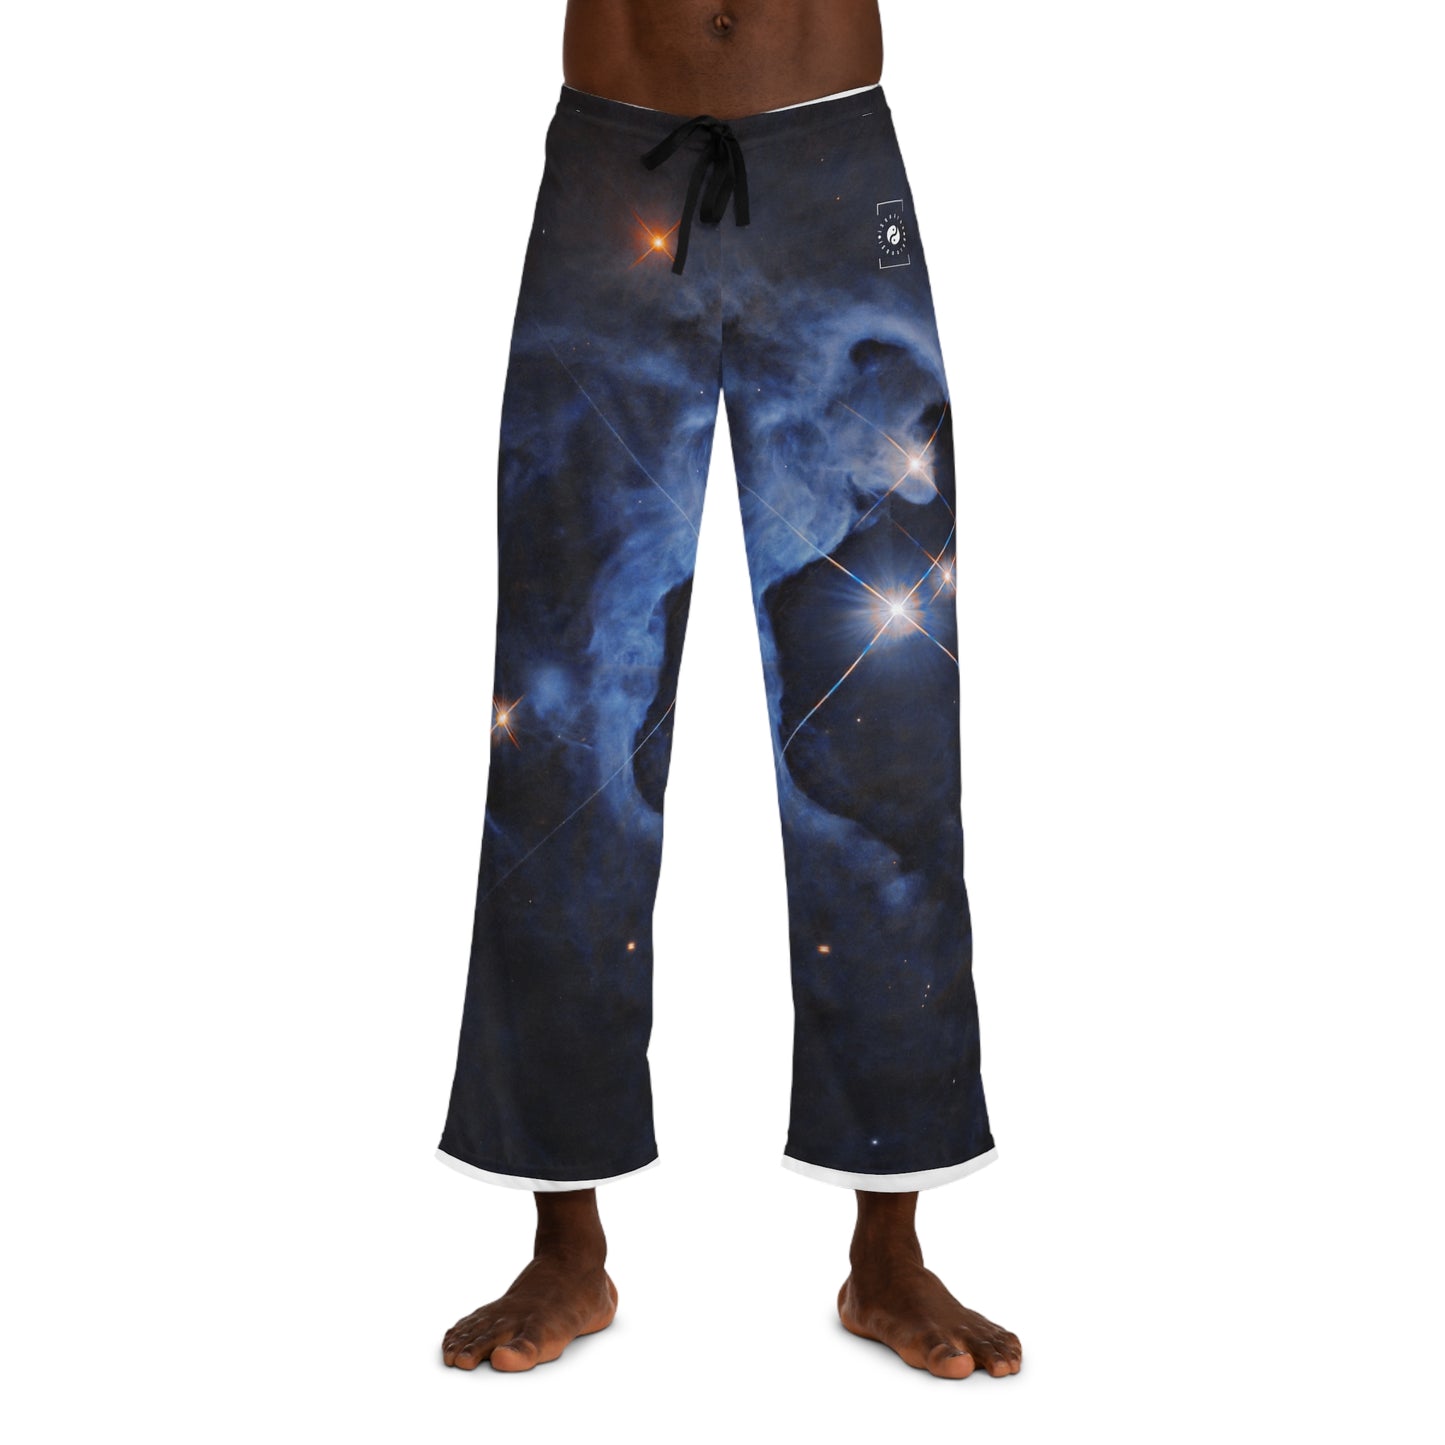 HP Tau, HP Tau G2, and G3 3 star system captured by Hubble - men's Lounge Pants